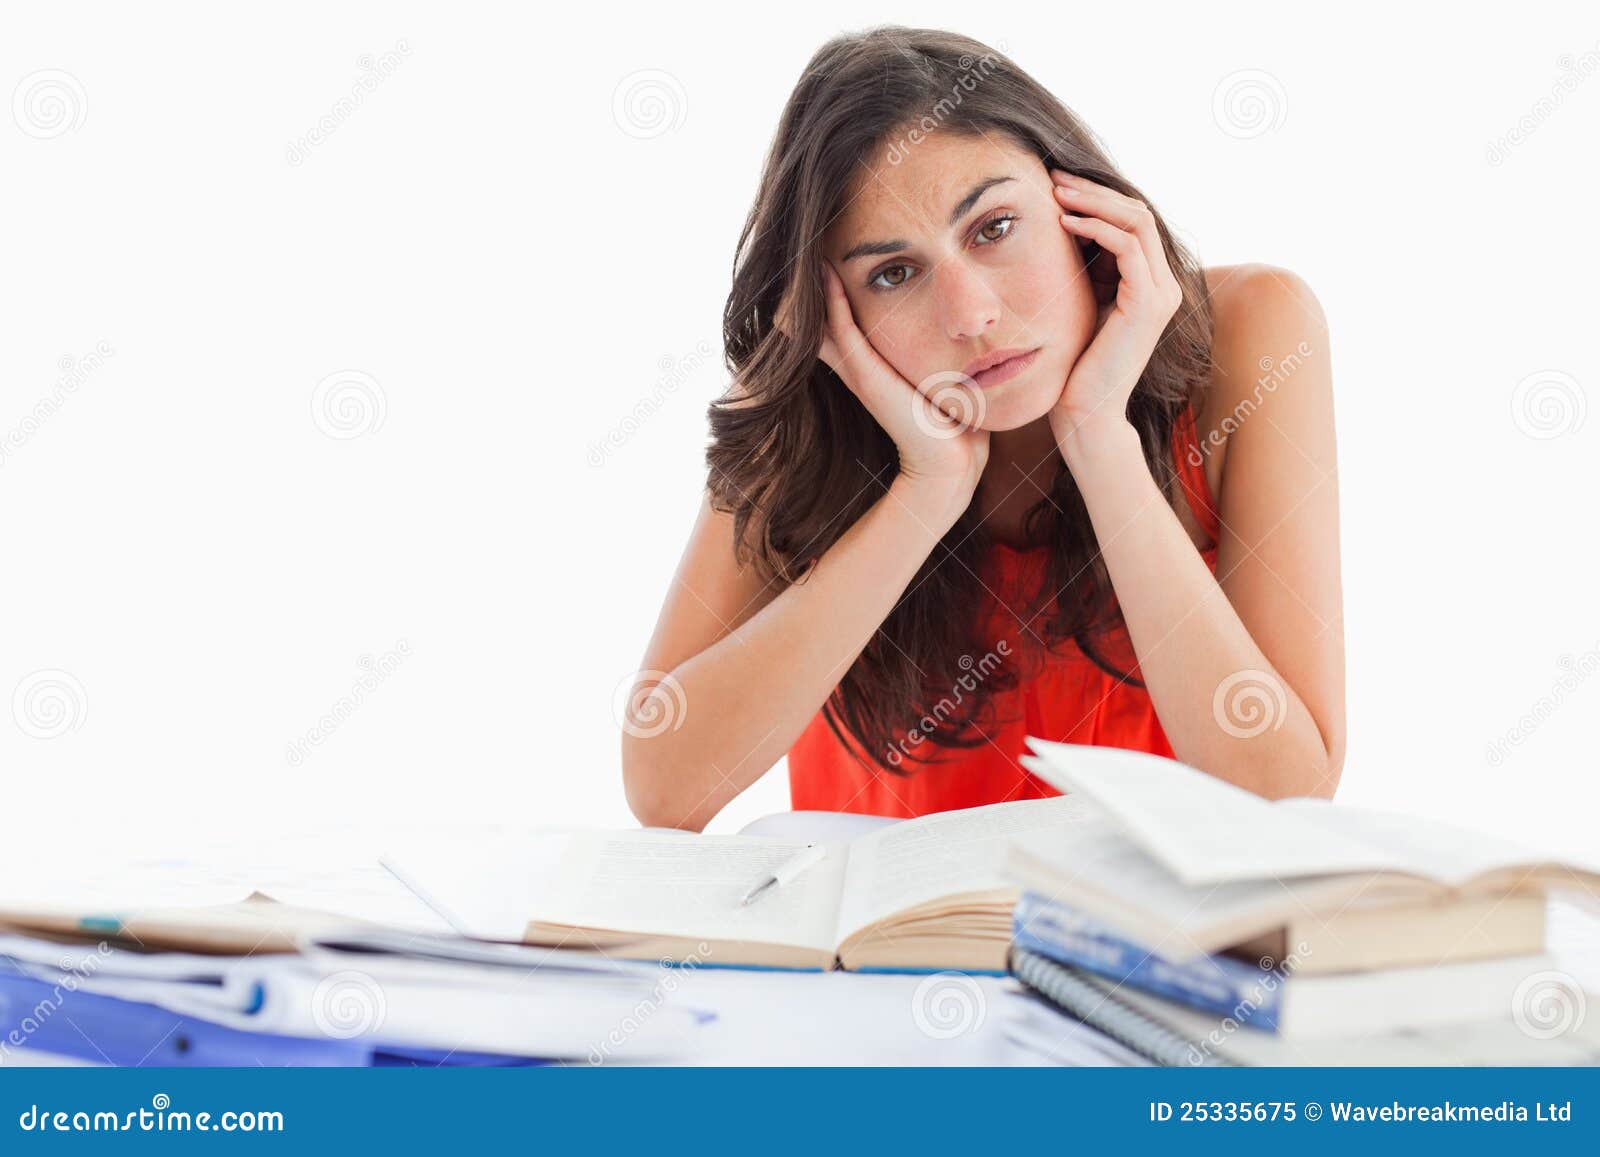 Portrait Of A Bored Student Doing Her Homework Stock Image Image Of